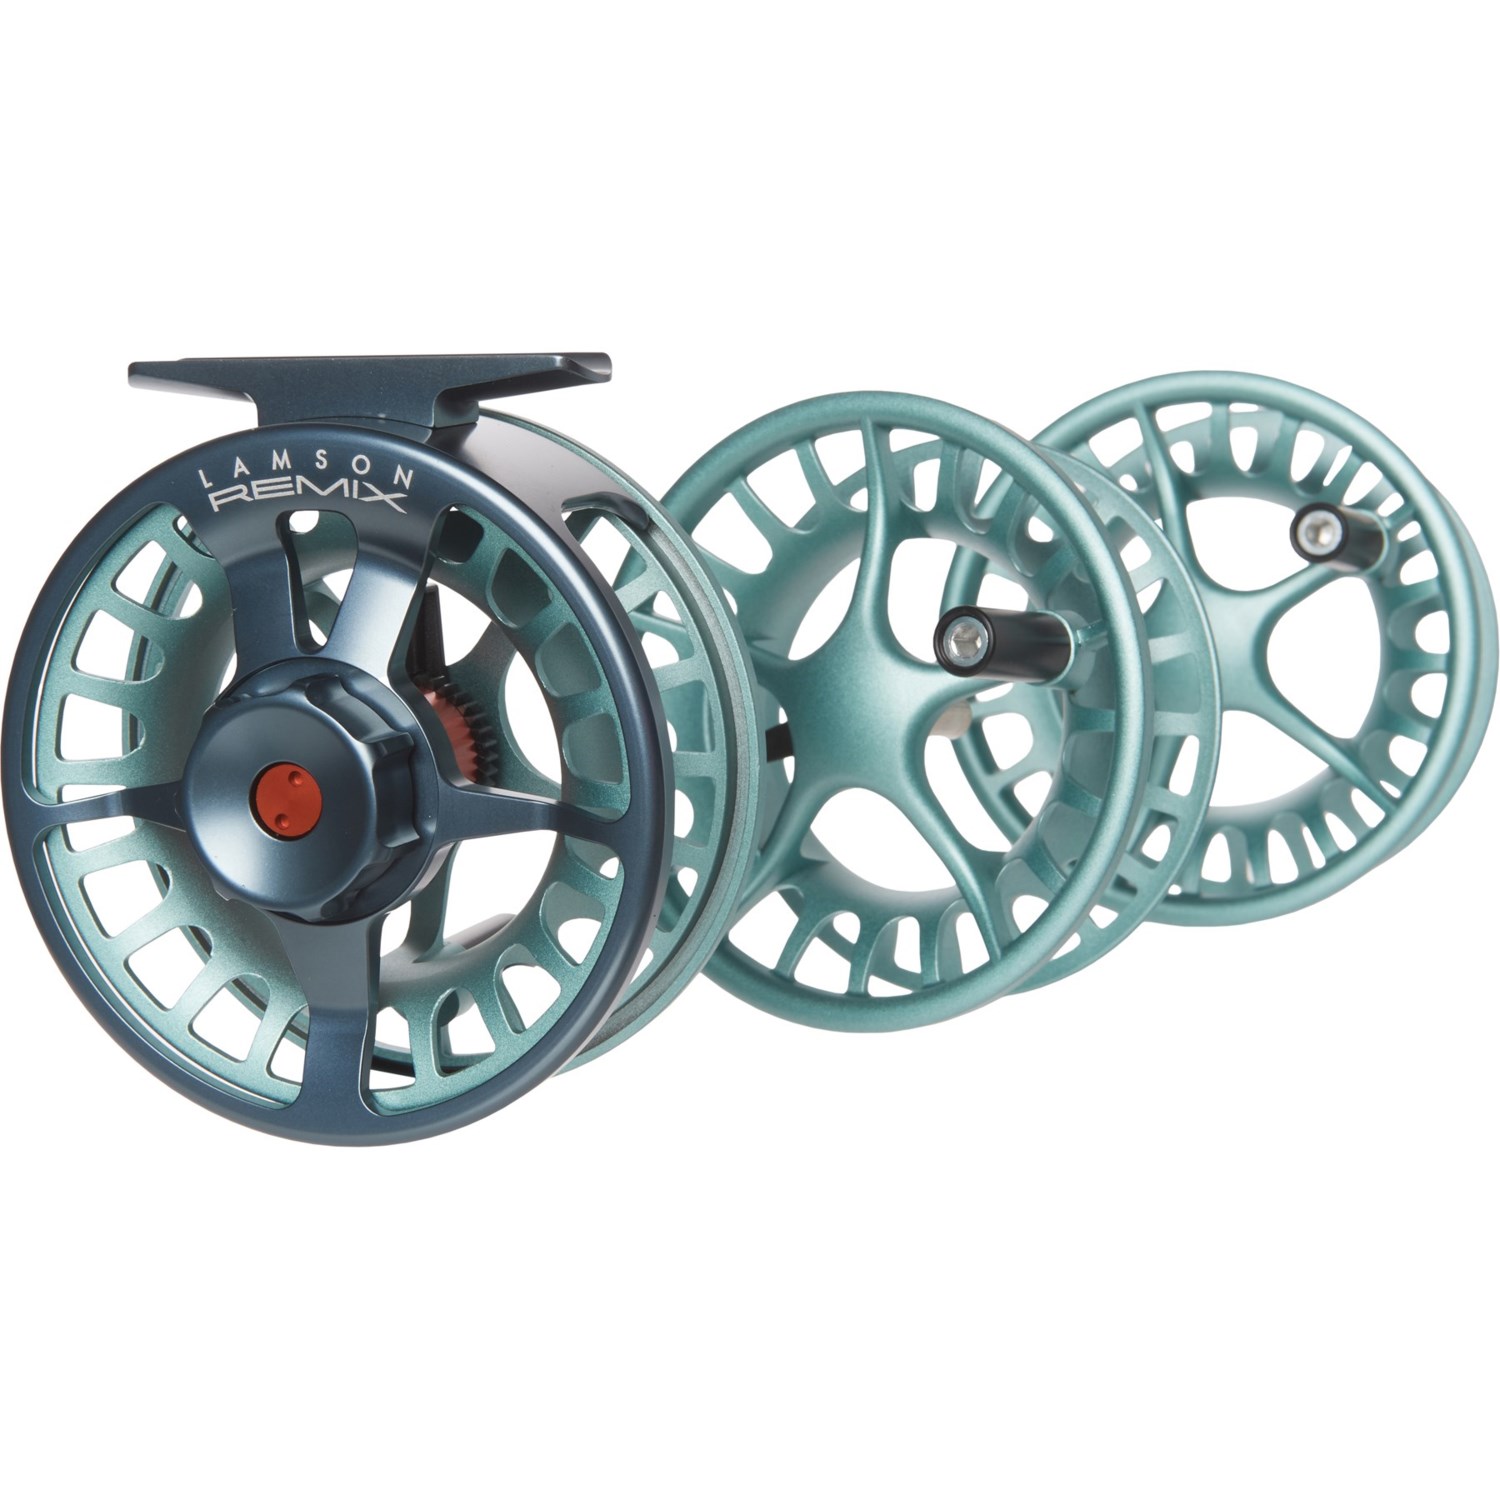 Lamson Remix 3 Pack Fly Reel & 2 Spare Spools